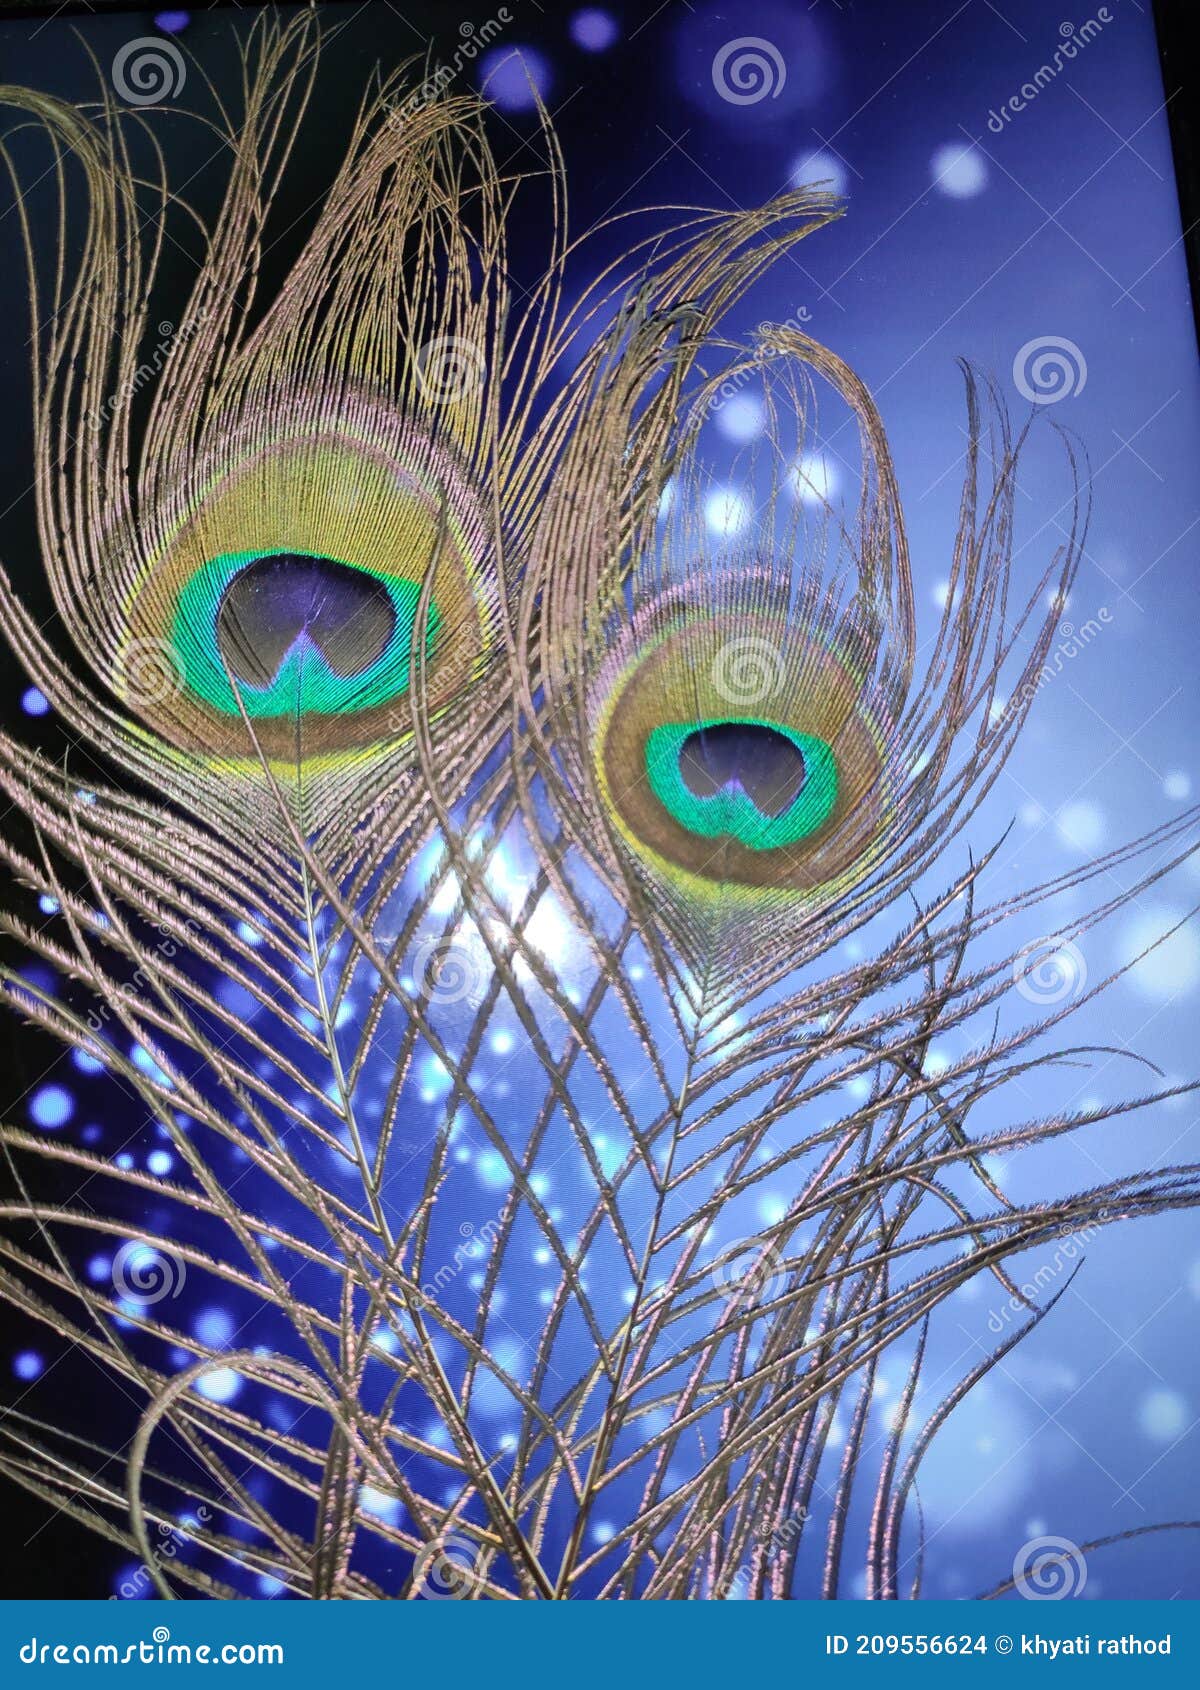 peacock fiddles blue background and couple